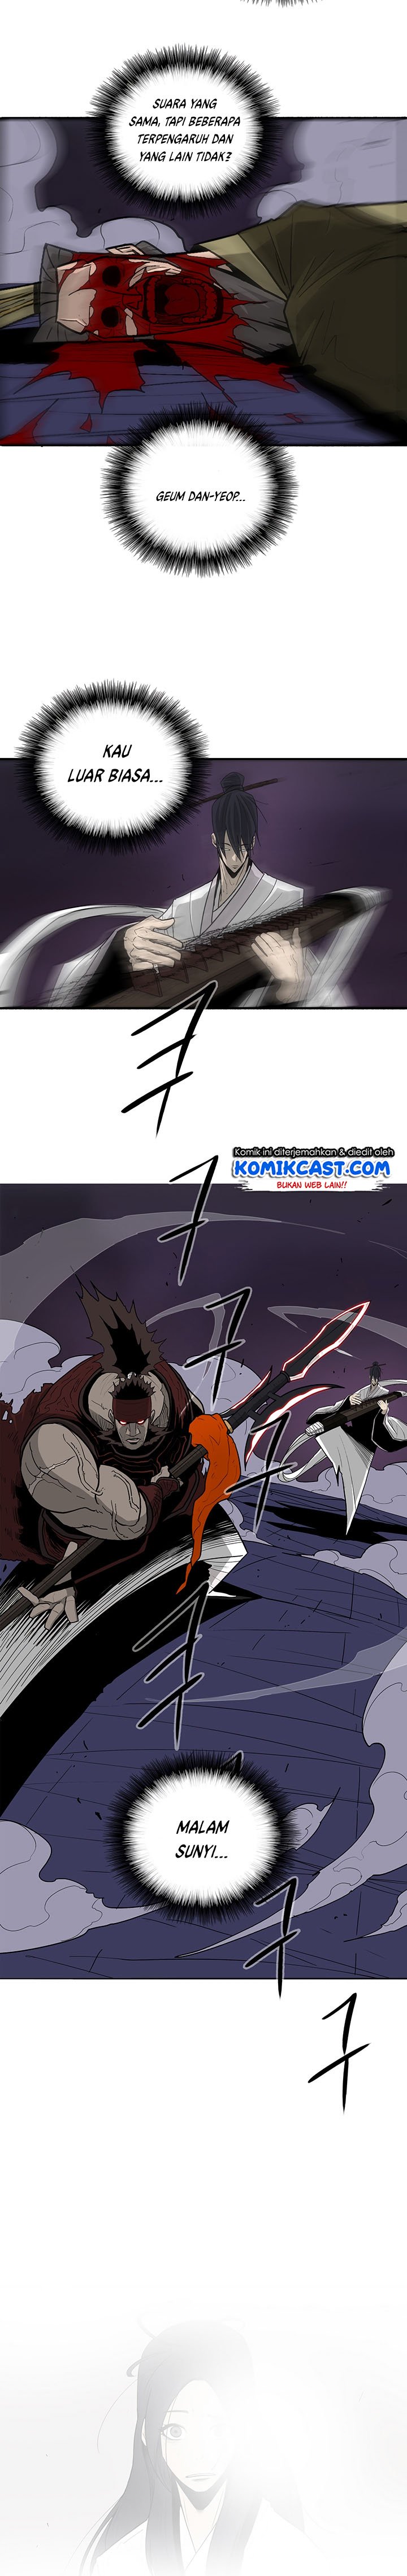 Legend of the Northern Blade Chapter 45